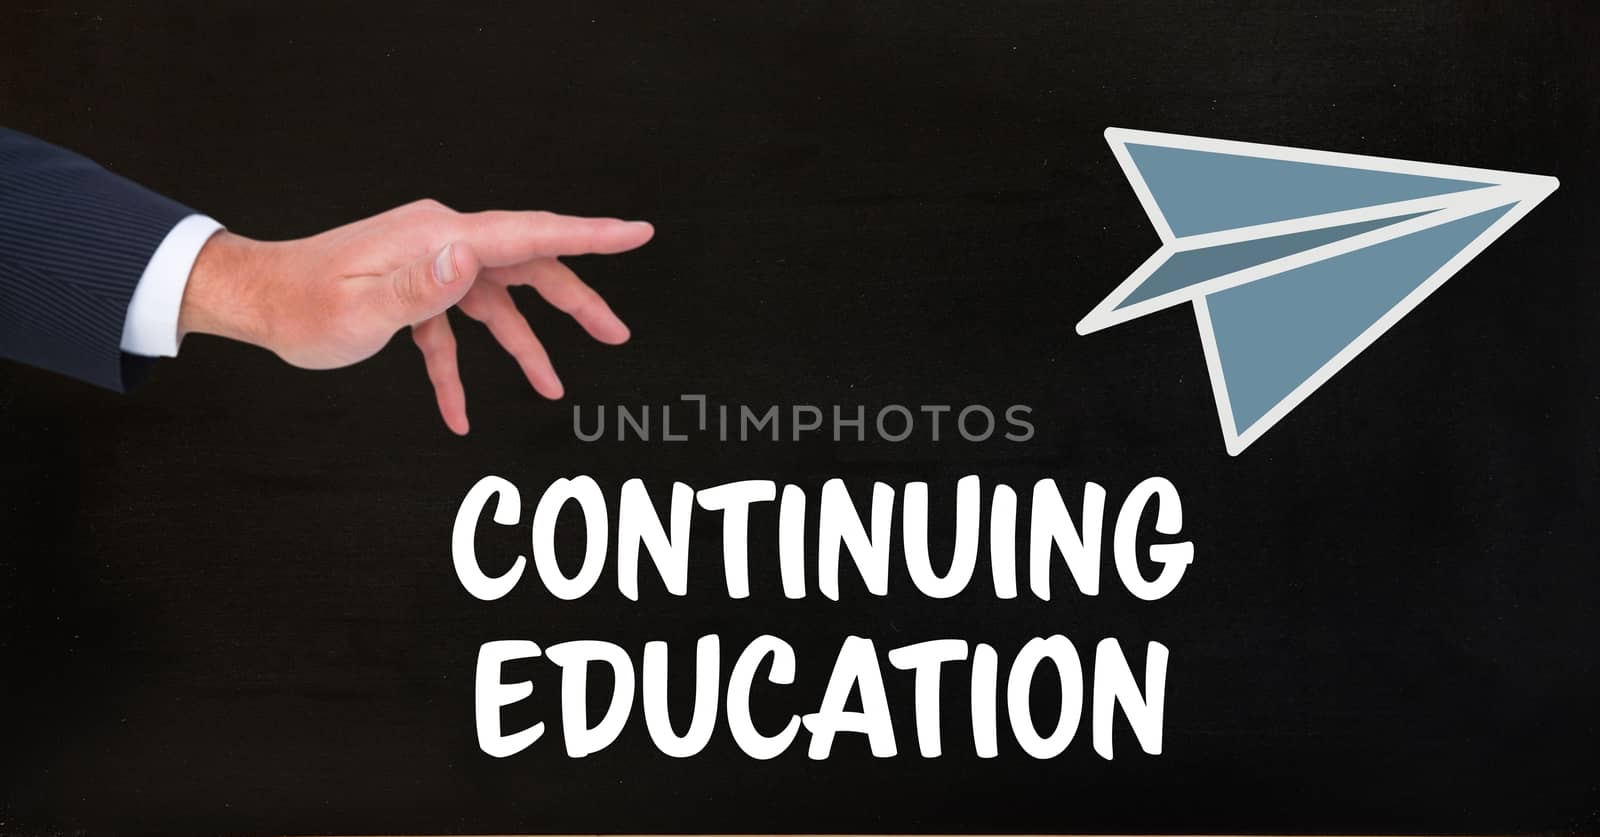 Hand throwing paper airplane Continuing further education on blackboard by Wavebreakmedia